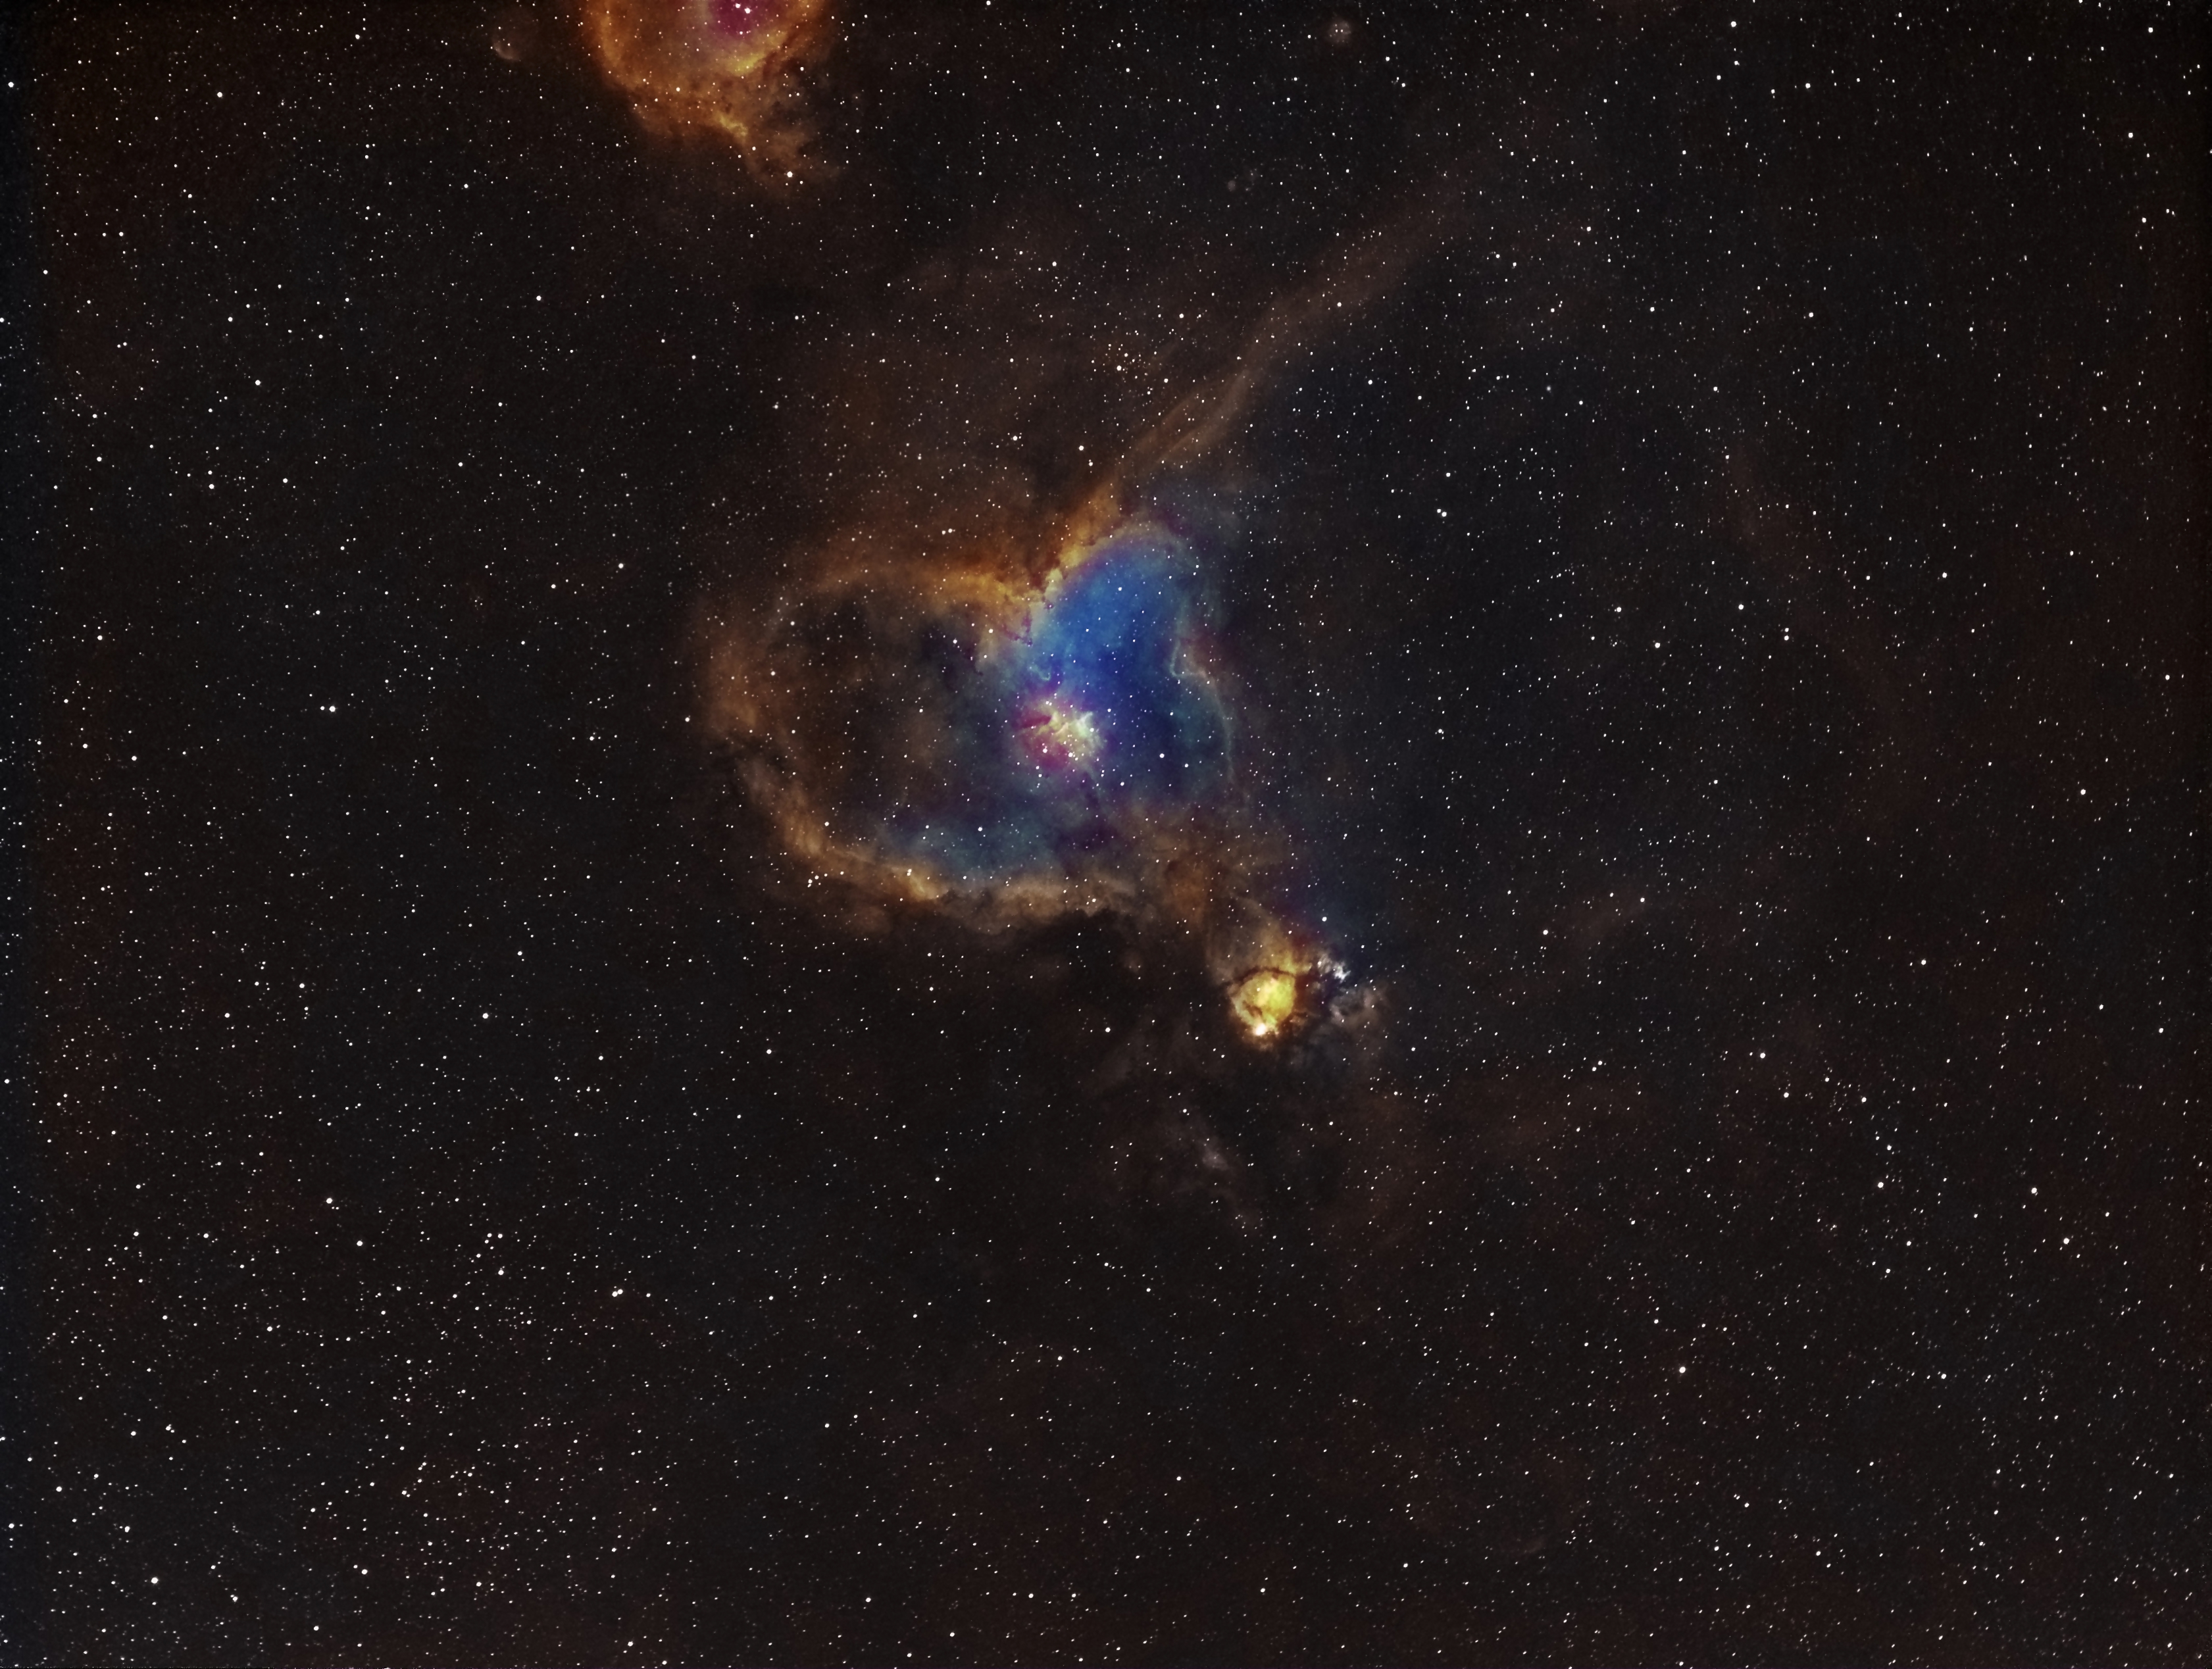 GH_IC1805_Hubble_Hotpixelreduction